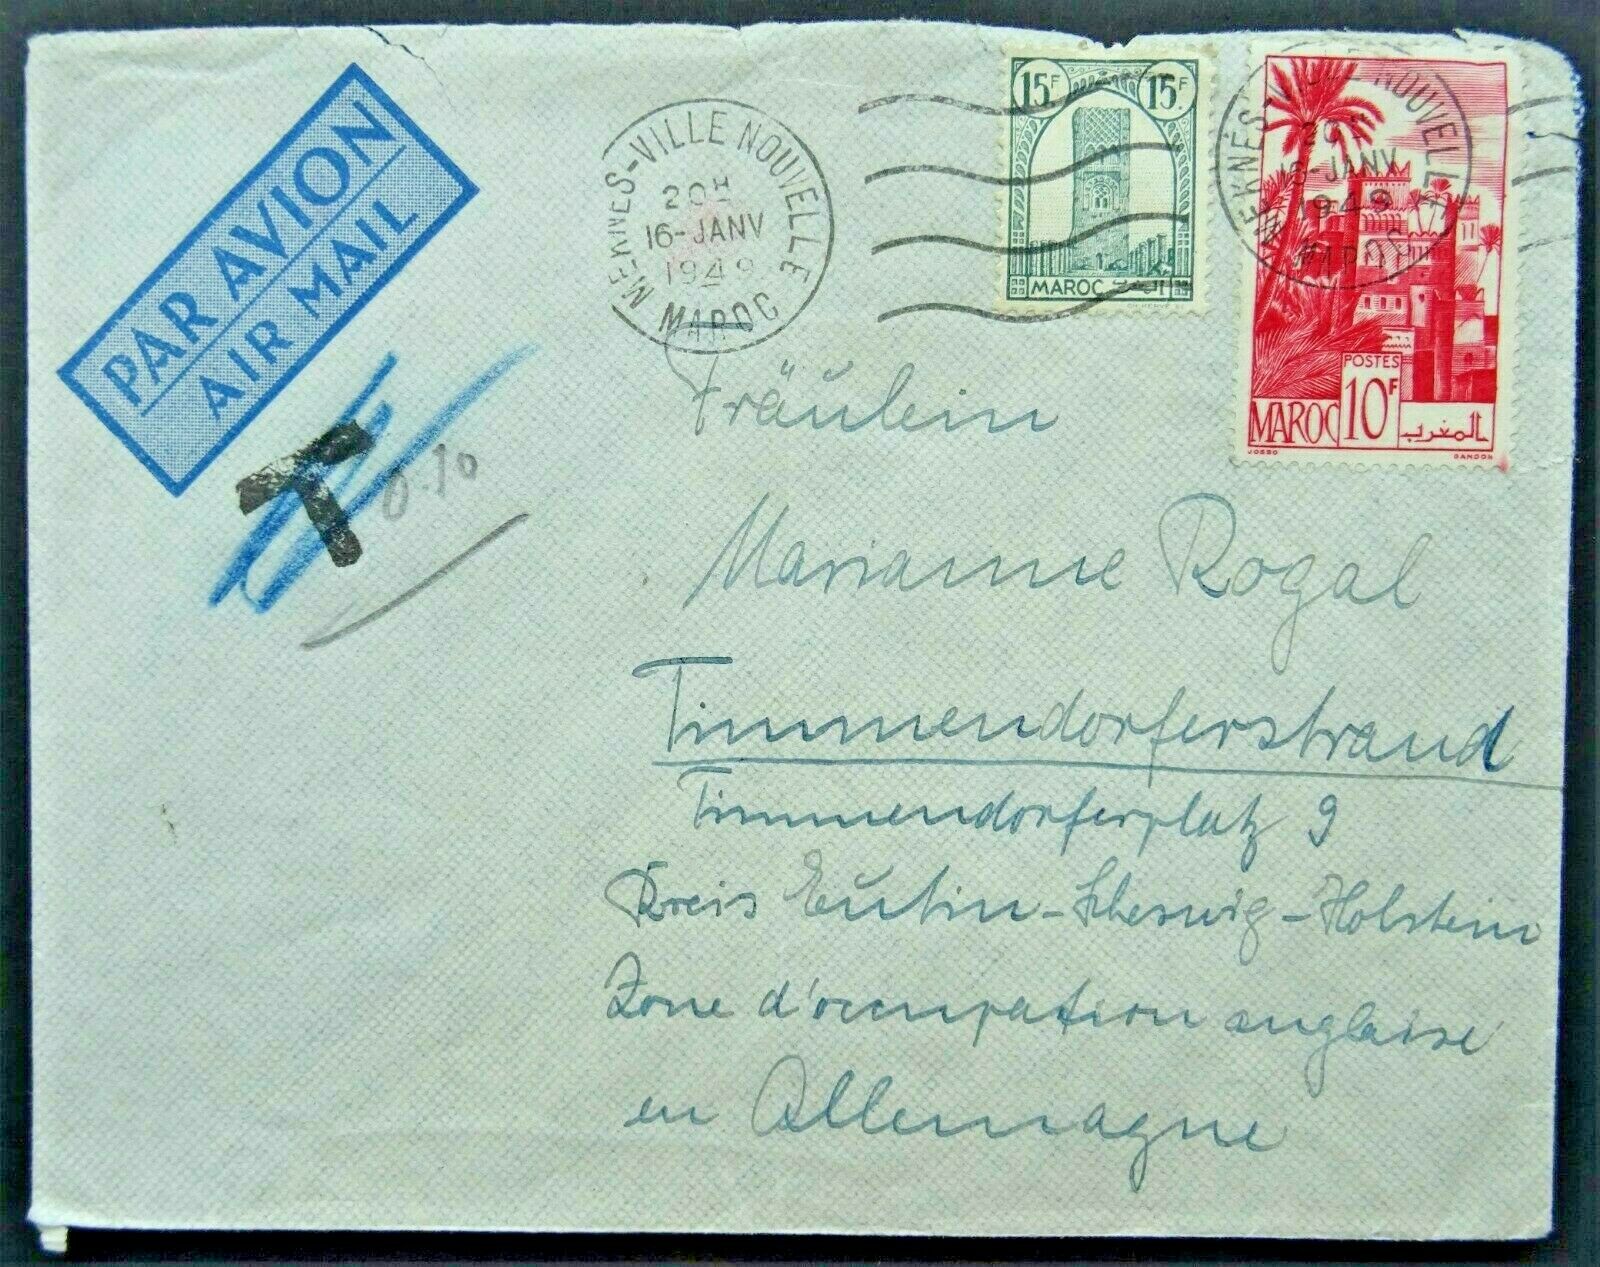 Stamped Envelope Morocco to Timmersdorferstrand with Typical Postal Stamp 1949